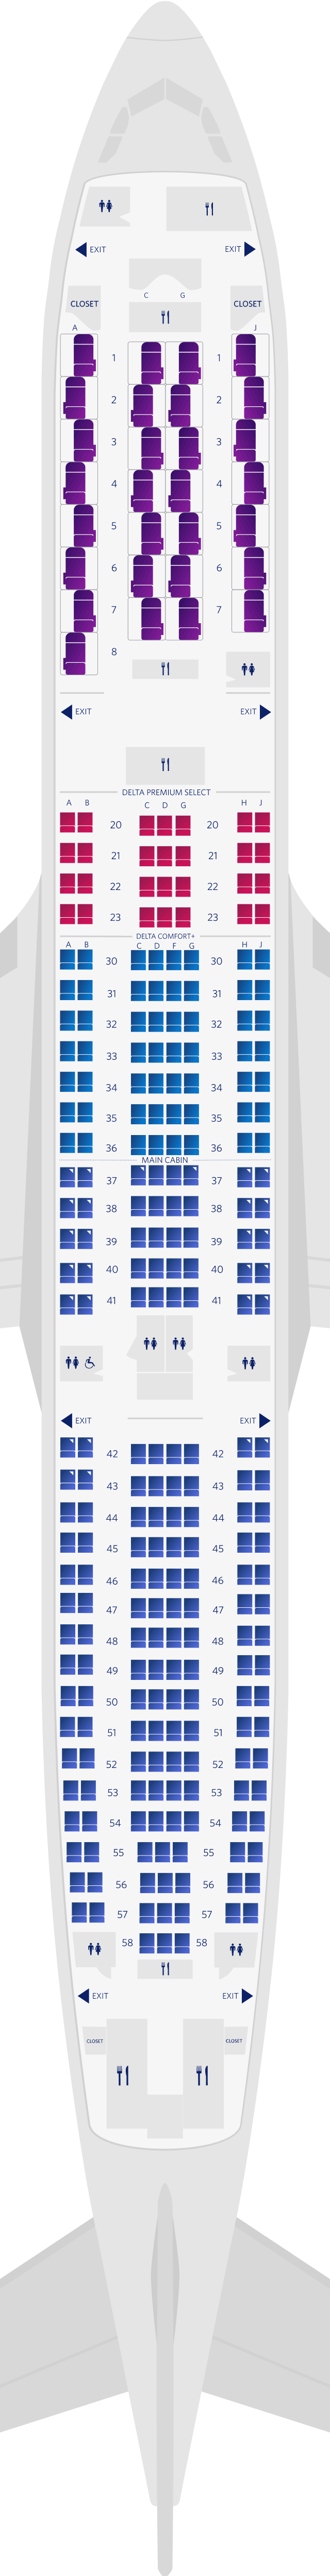 Delta Airbus A Seat Map Elcho Table